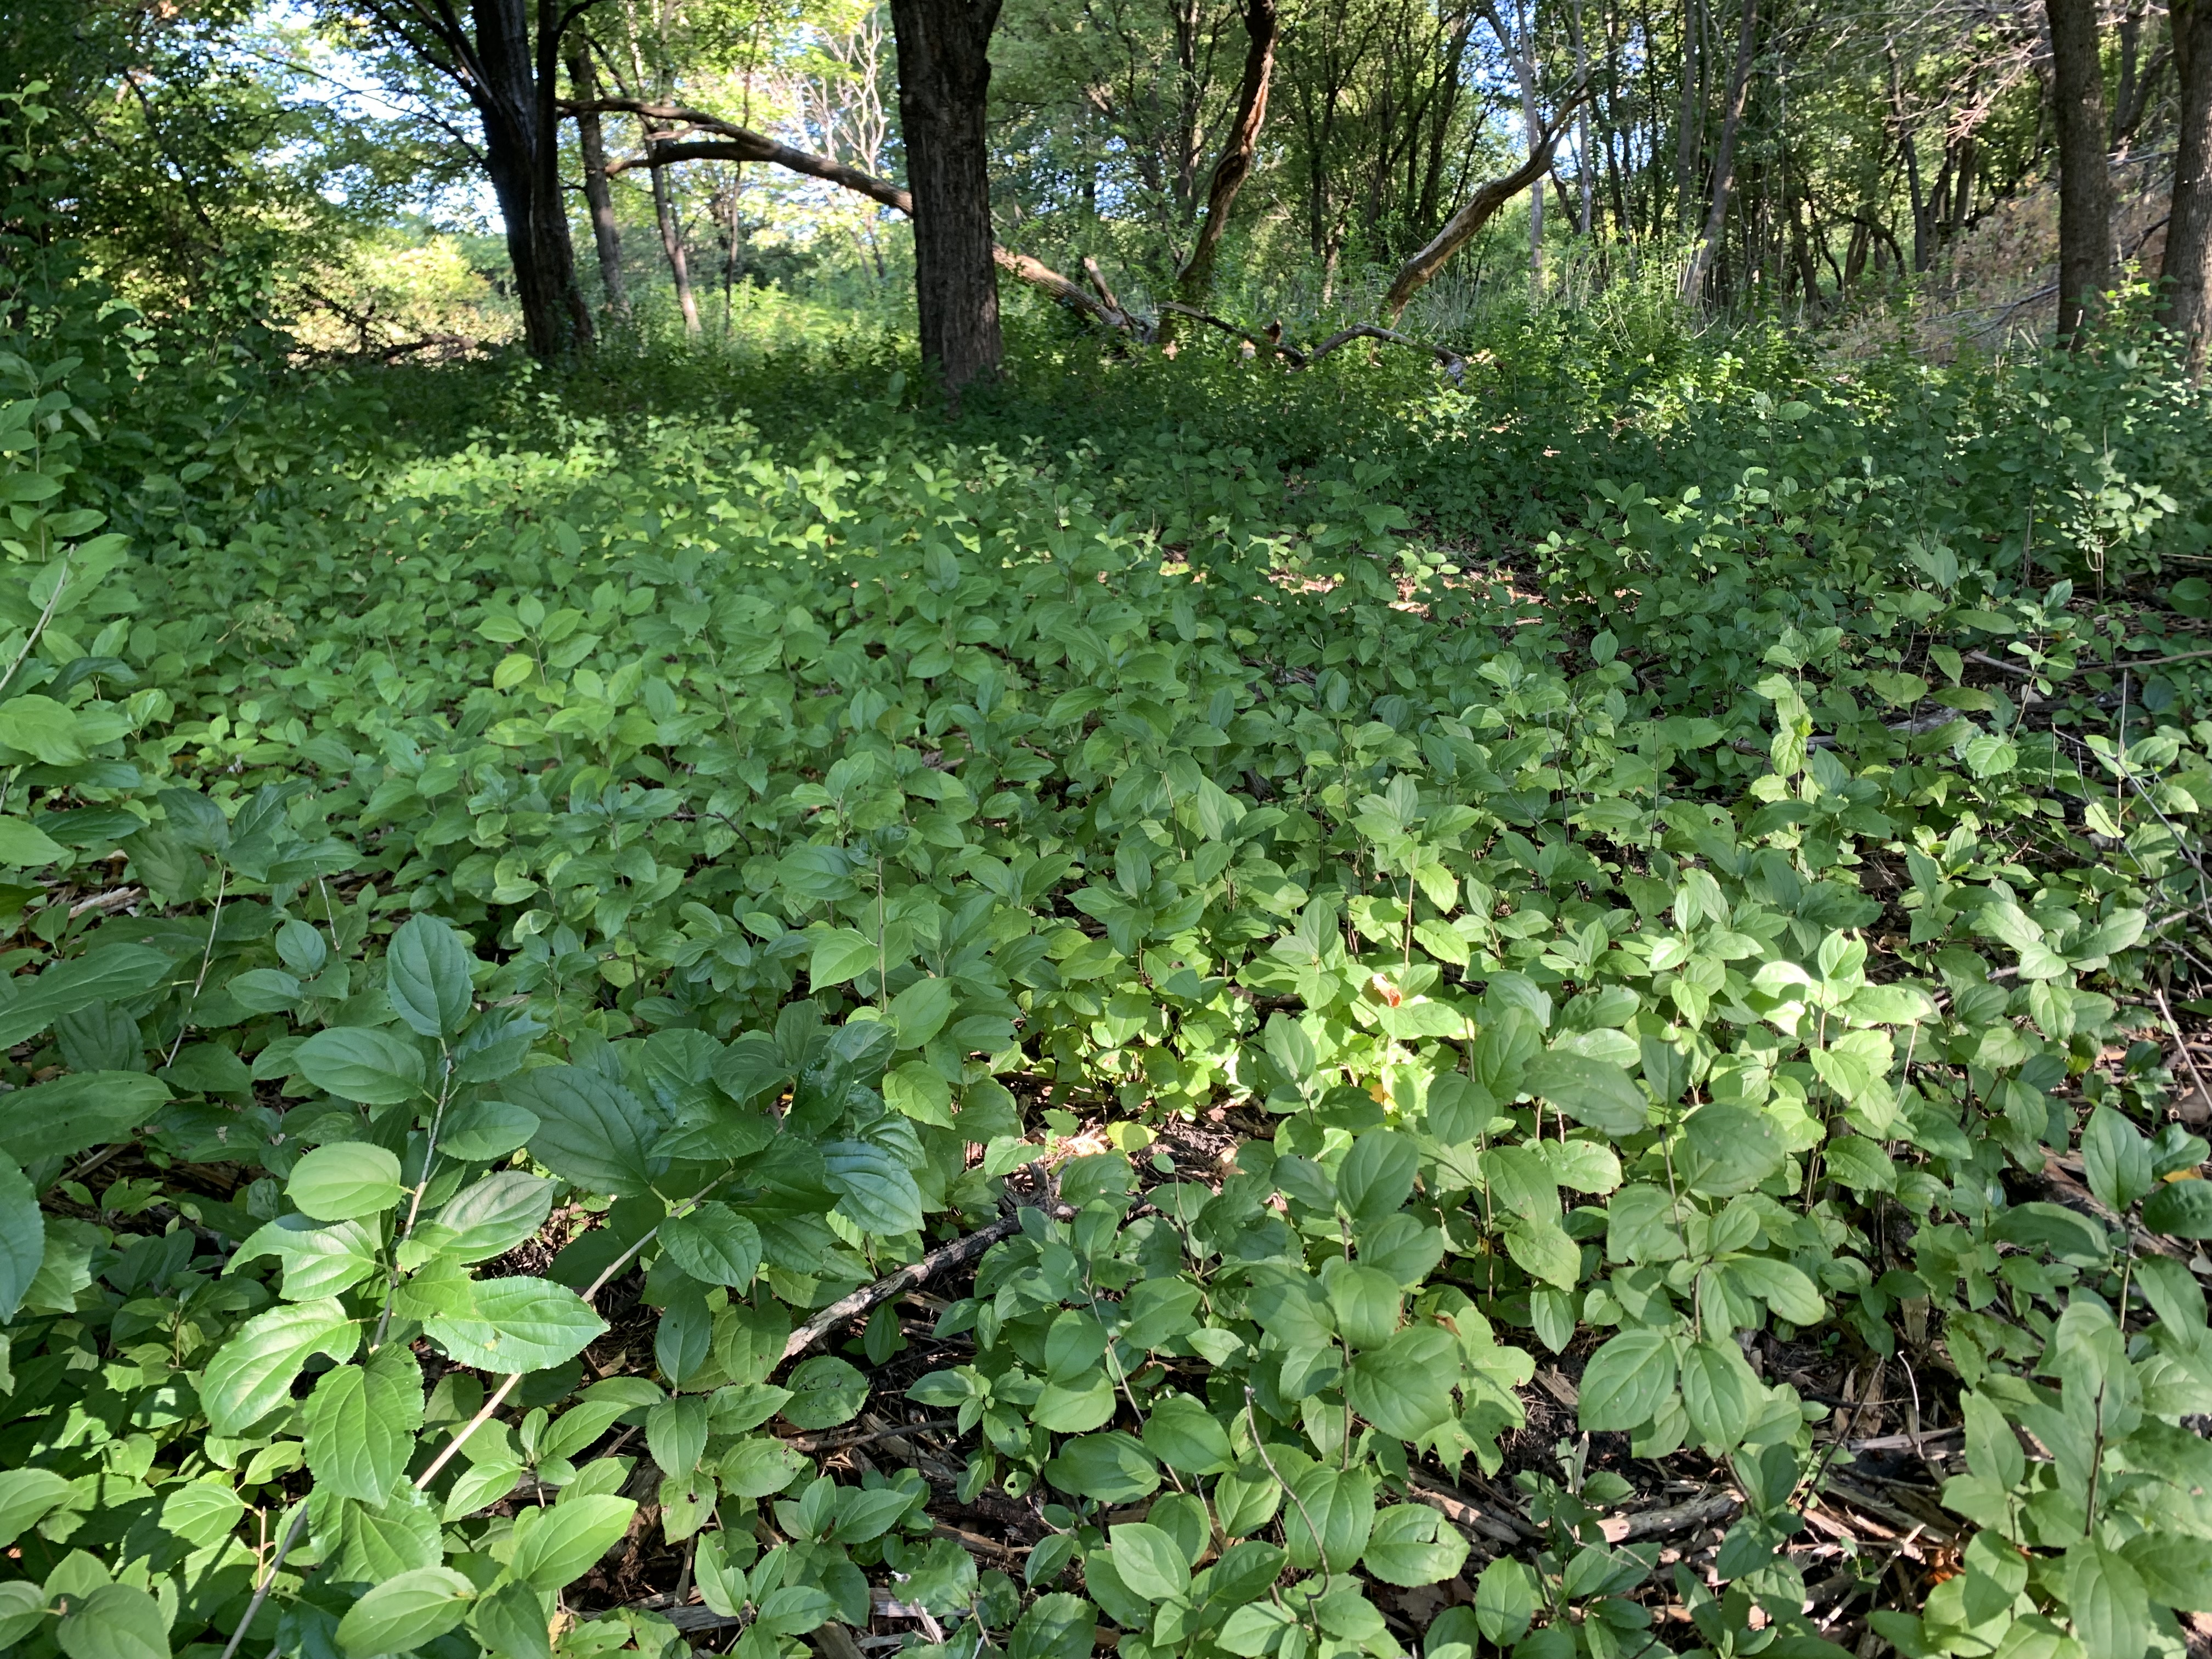 Image of a forest floor covered with young buckthorn plants